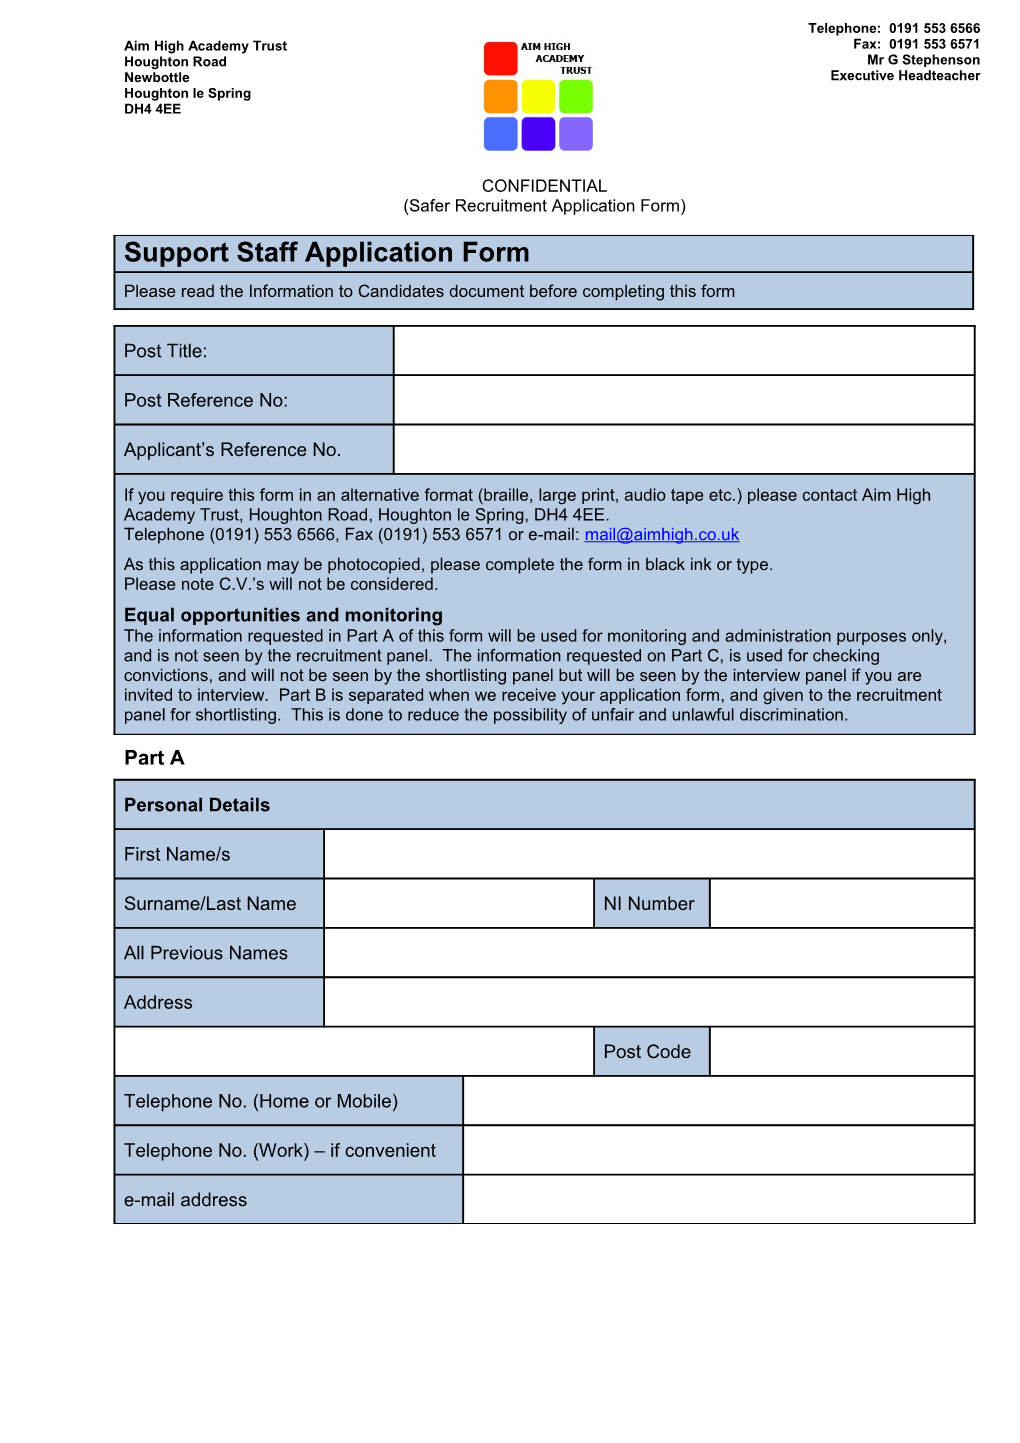 Application for a Support Staff Post in Schools